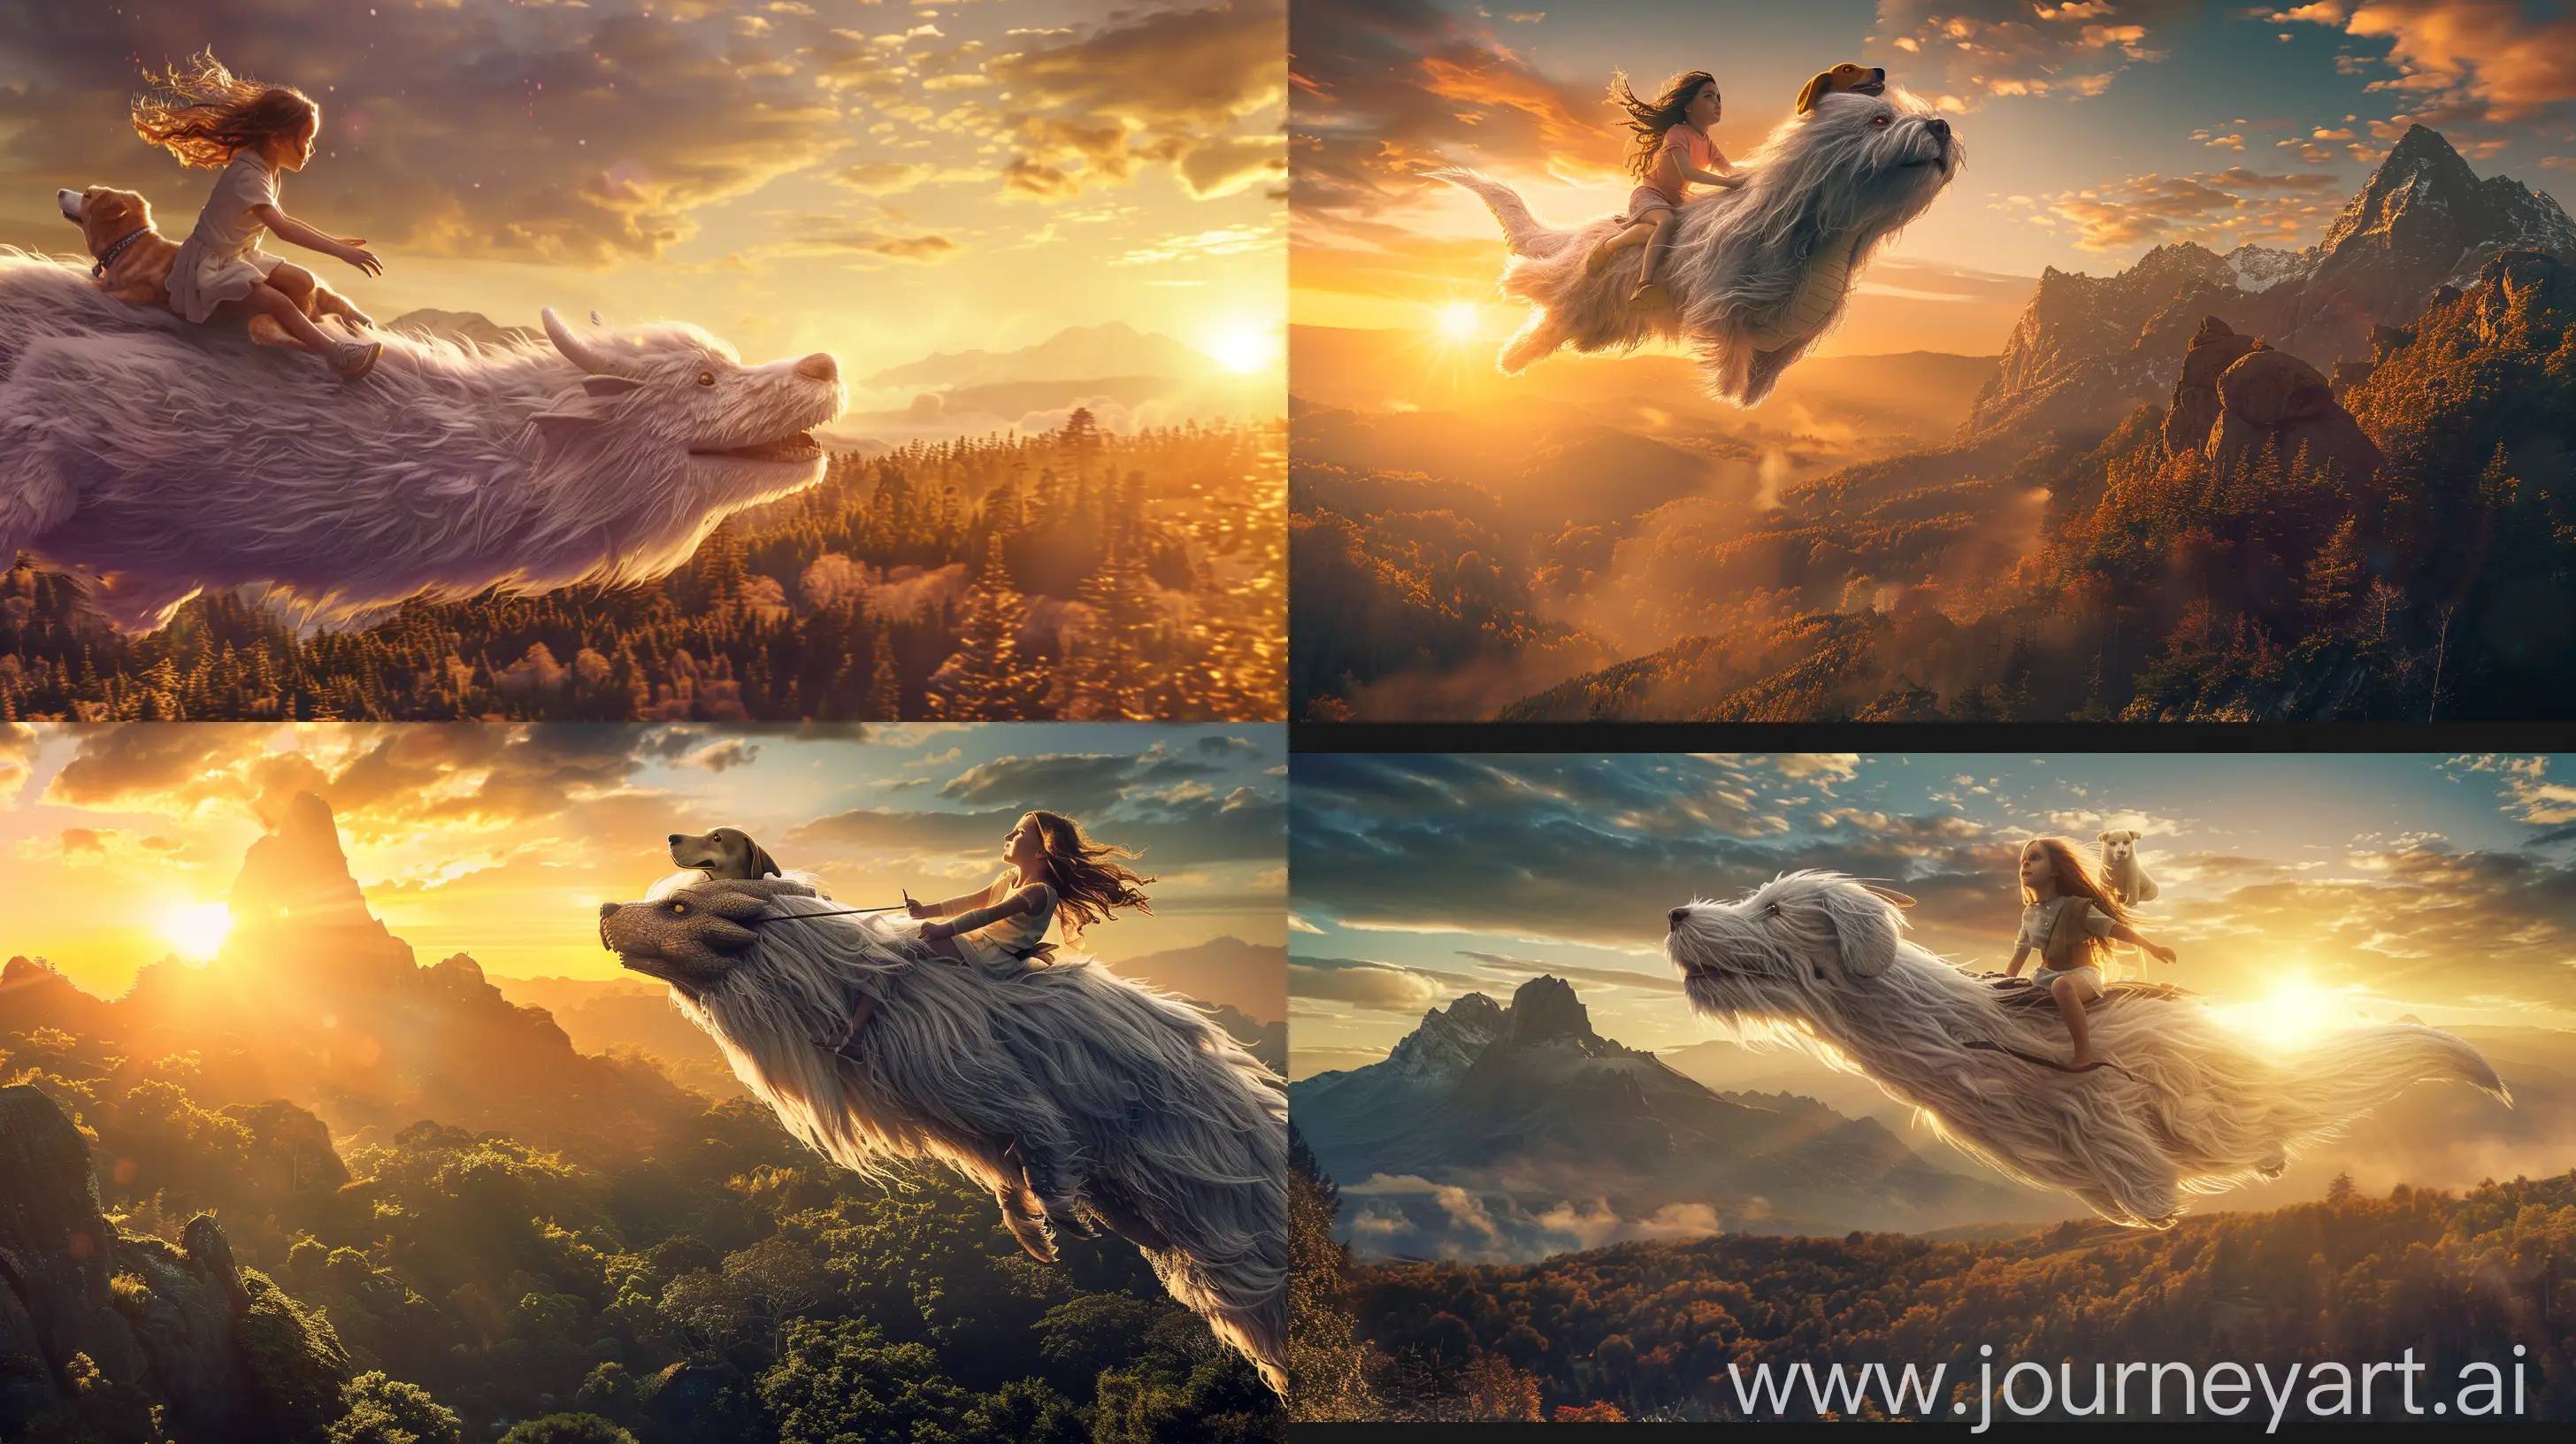 Young-Girl-Flying-on-Realistic-DogHeaded-Dragon-in-Sunset-Forest-Scene